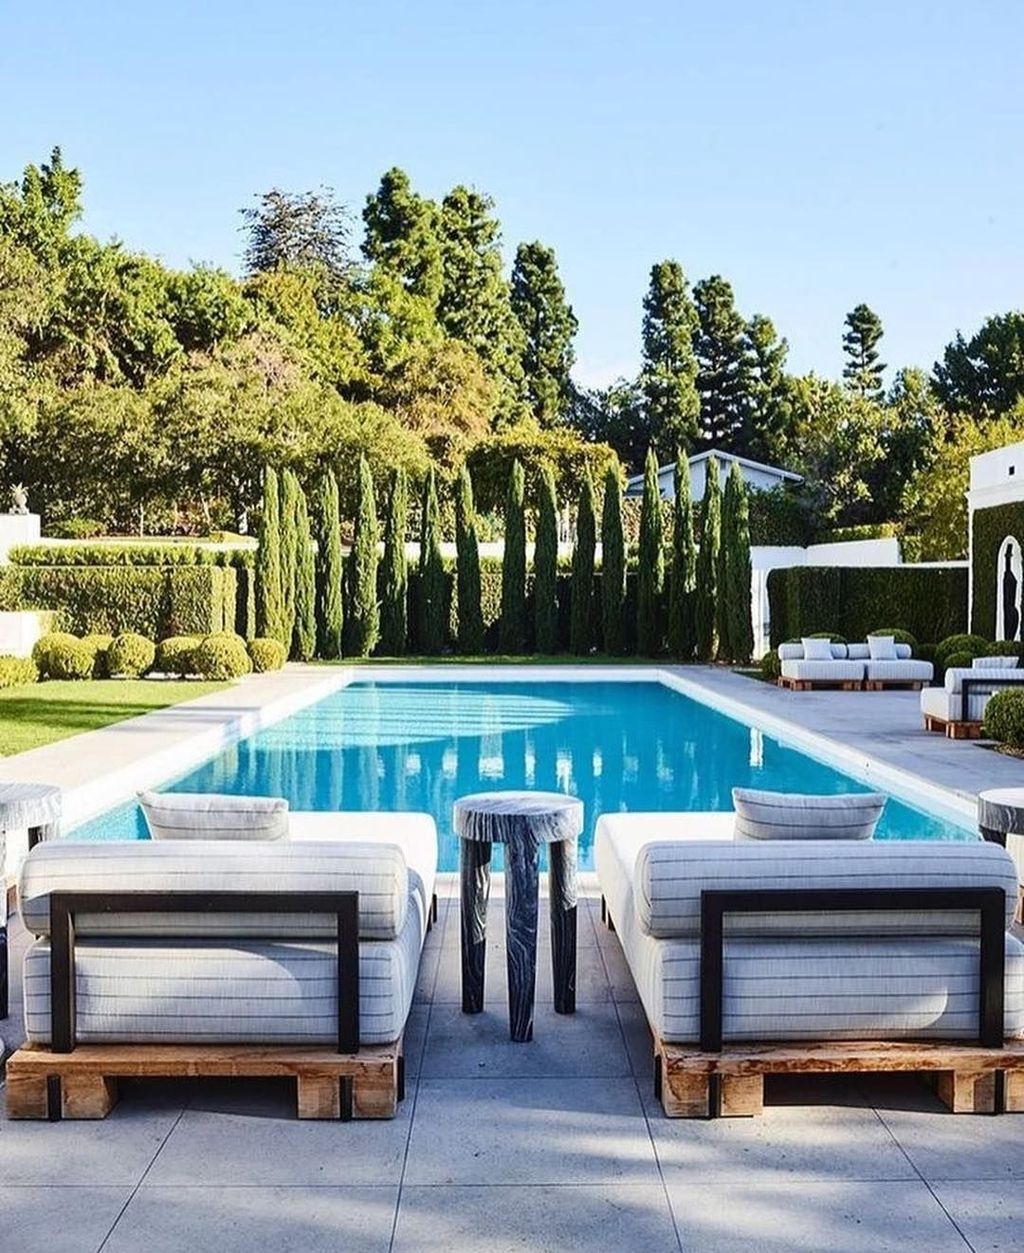 The Best Swimming Pool Design Ideas For Summer Time 31